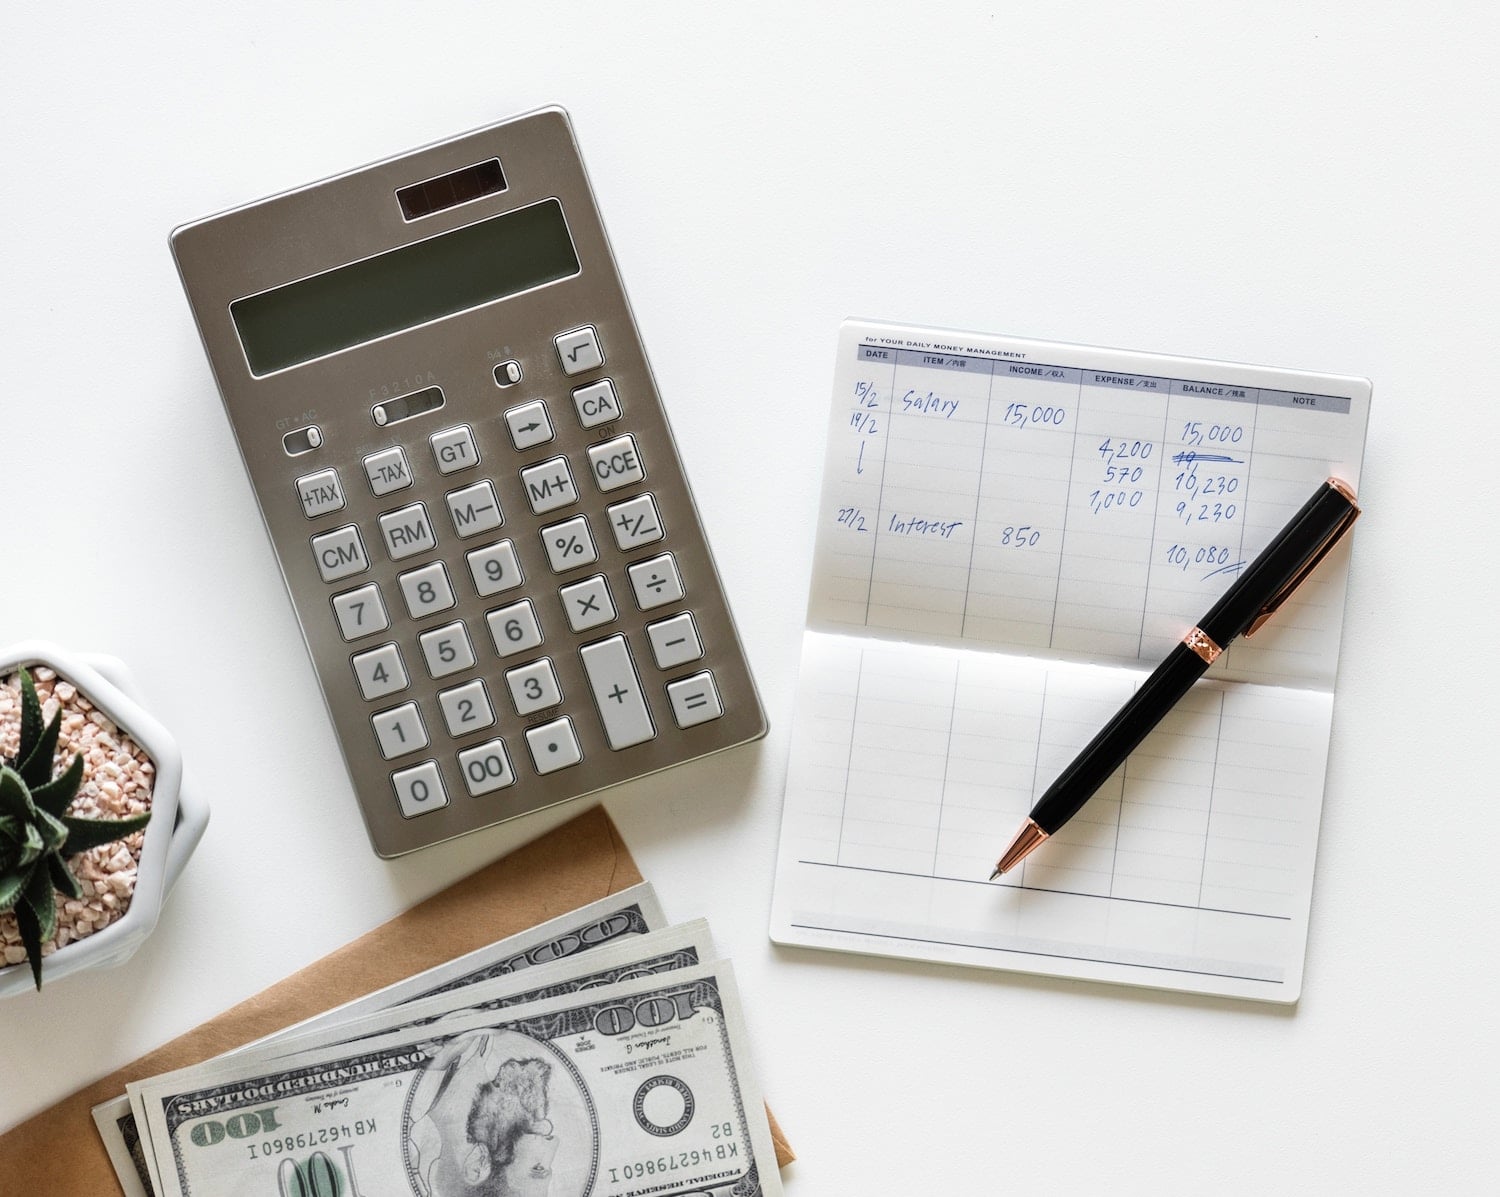 Tax tips for wellness professional. A calculator, ledger and pen.